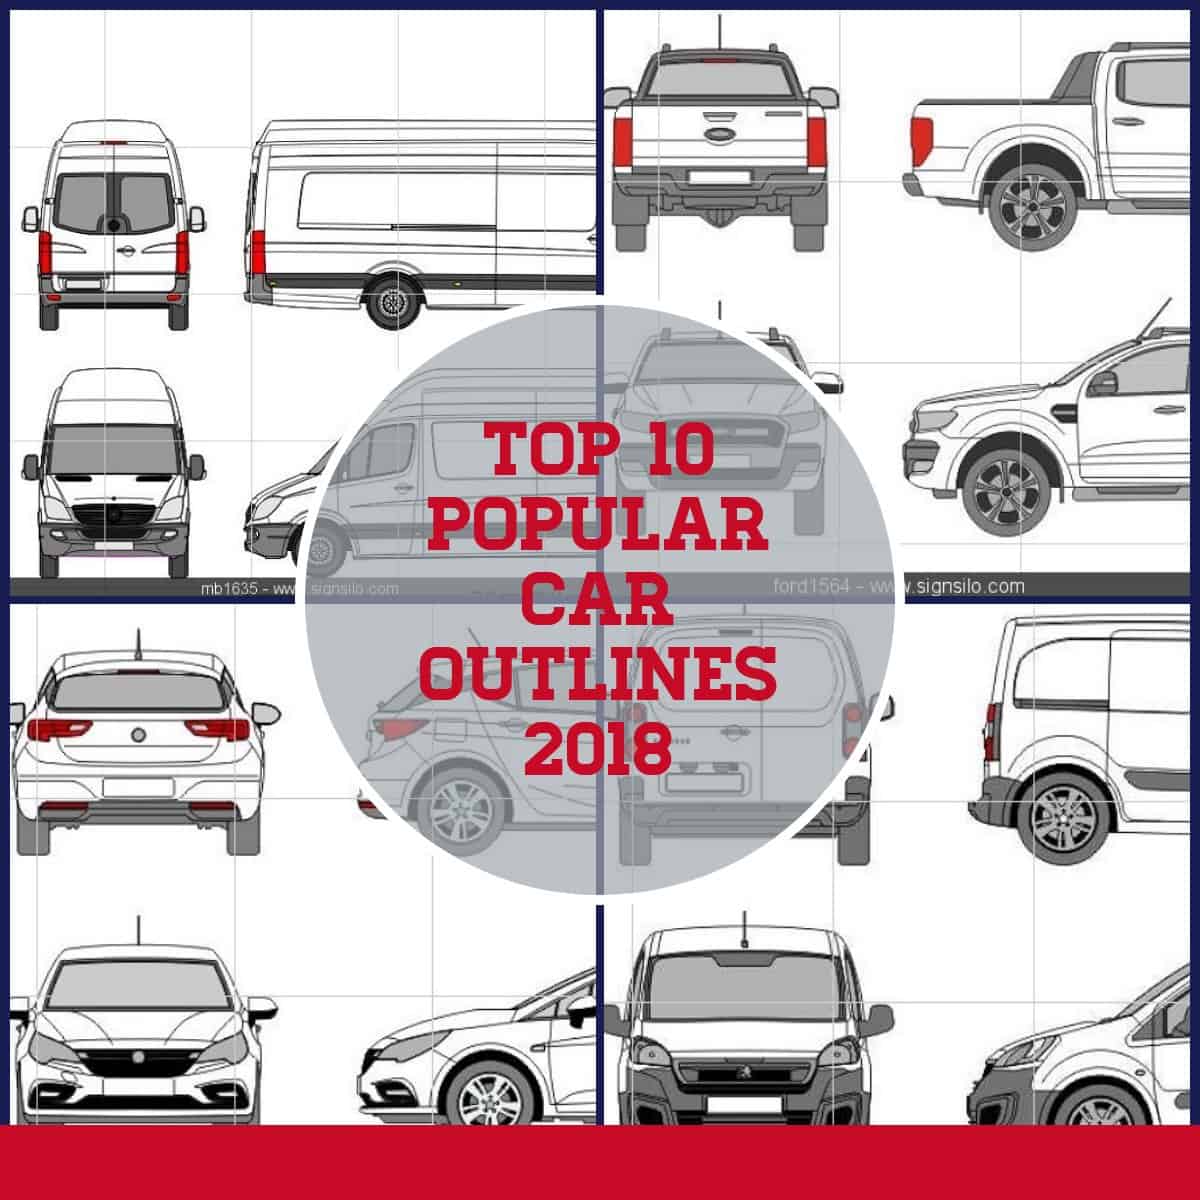 10 Most Popular Car Outlines 2023 - Discover This Year’s Top Vehicle Templates! 1